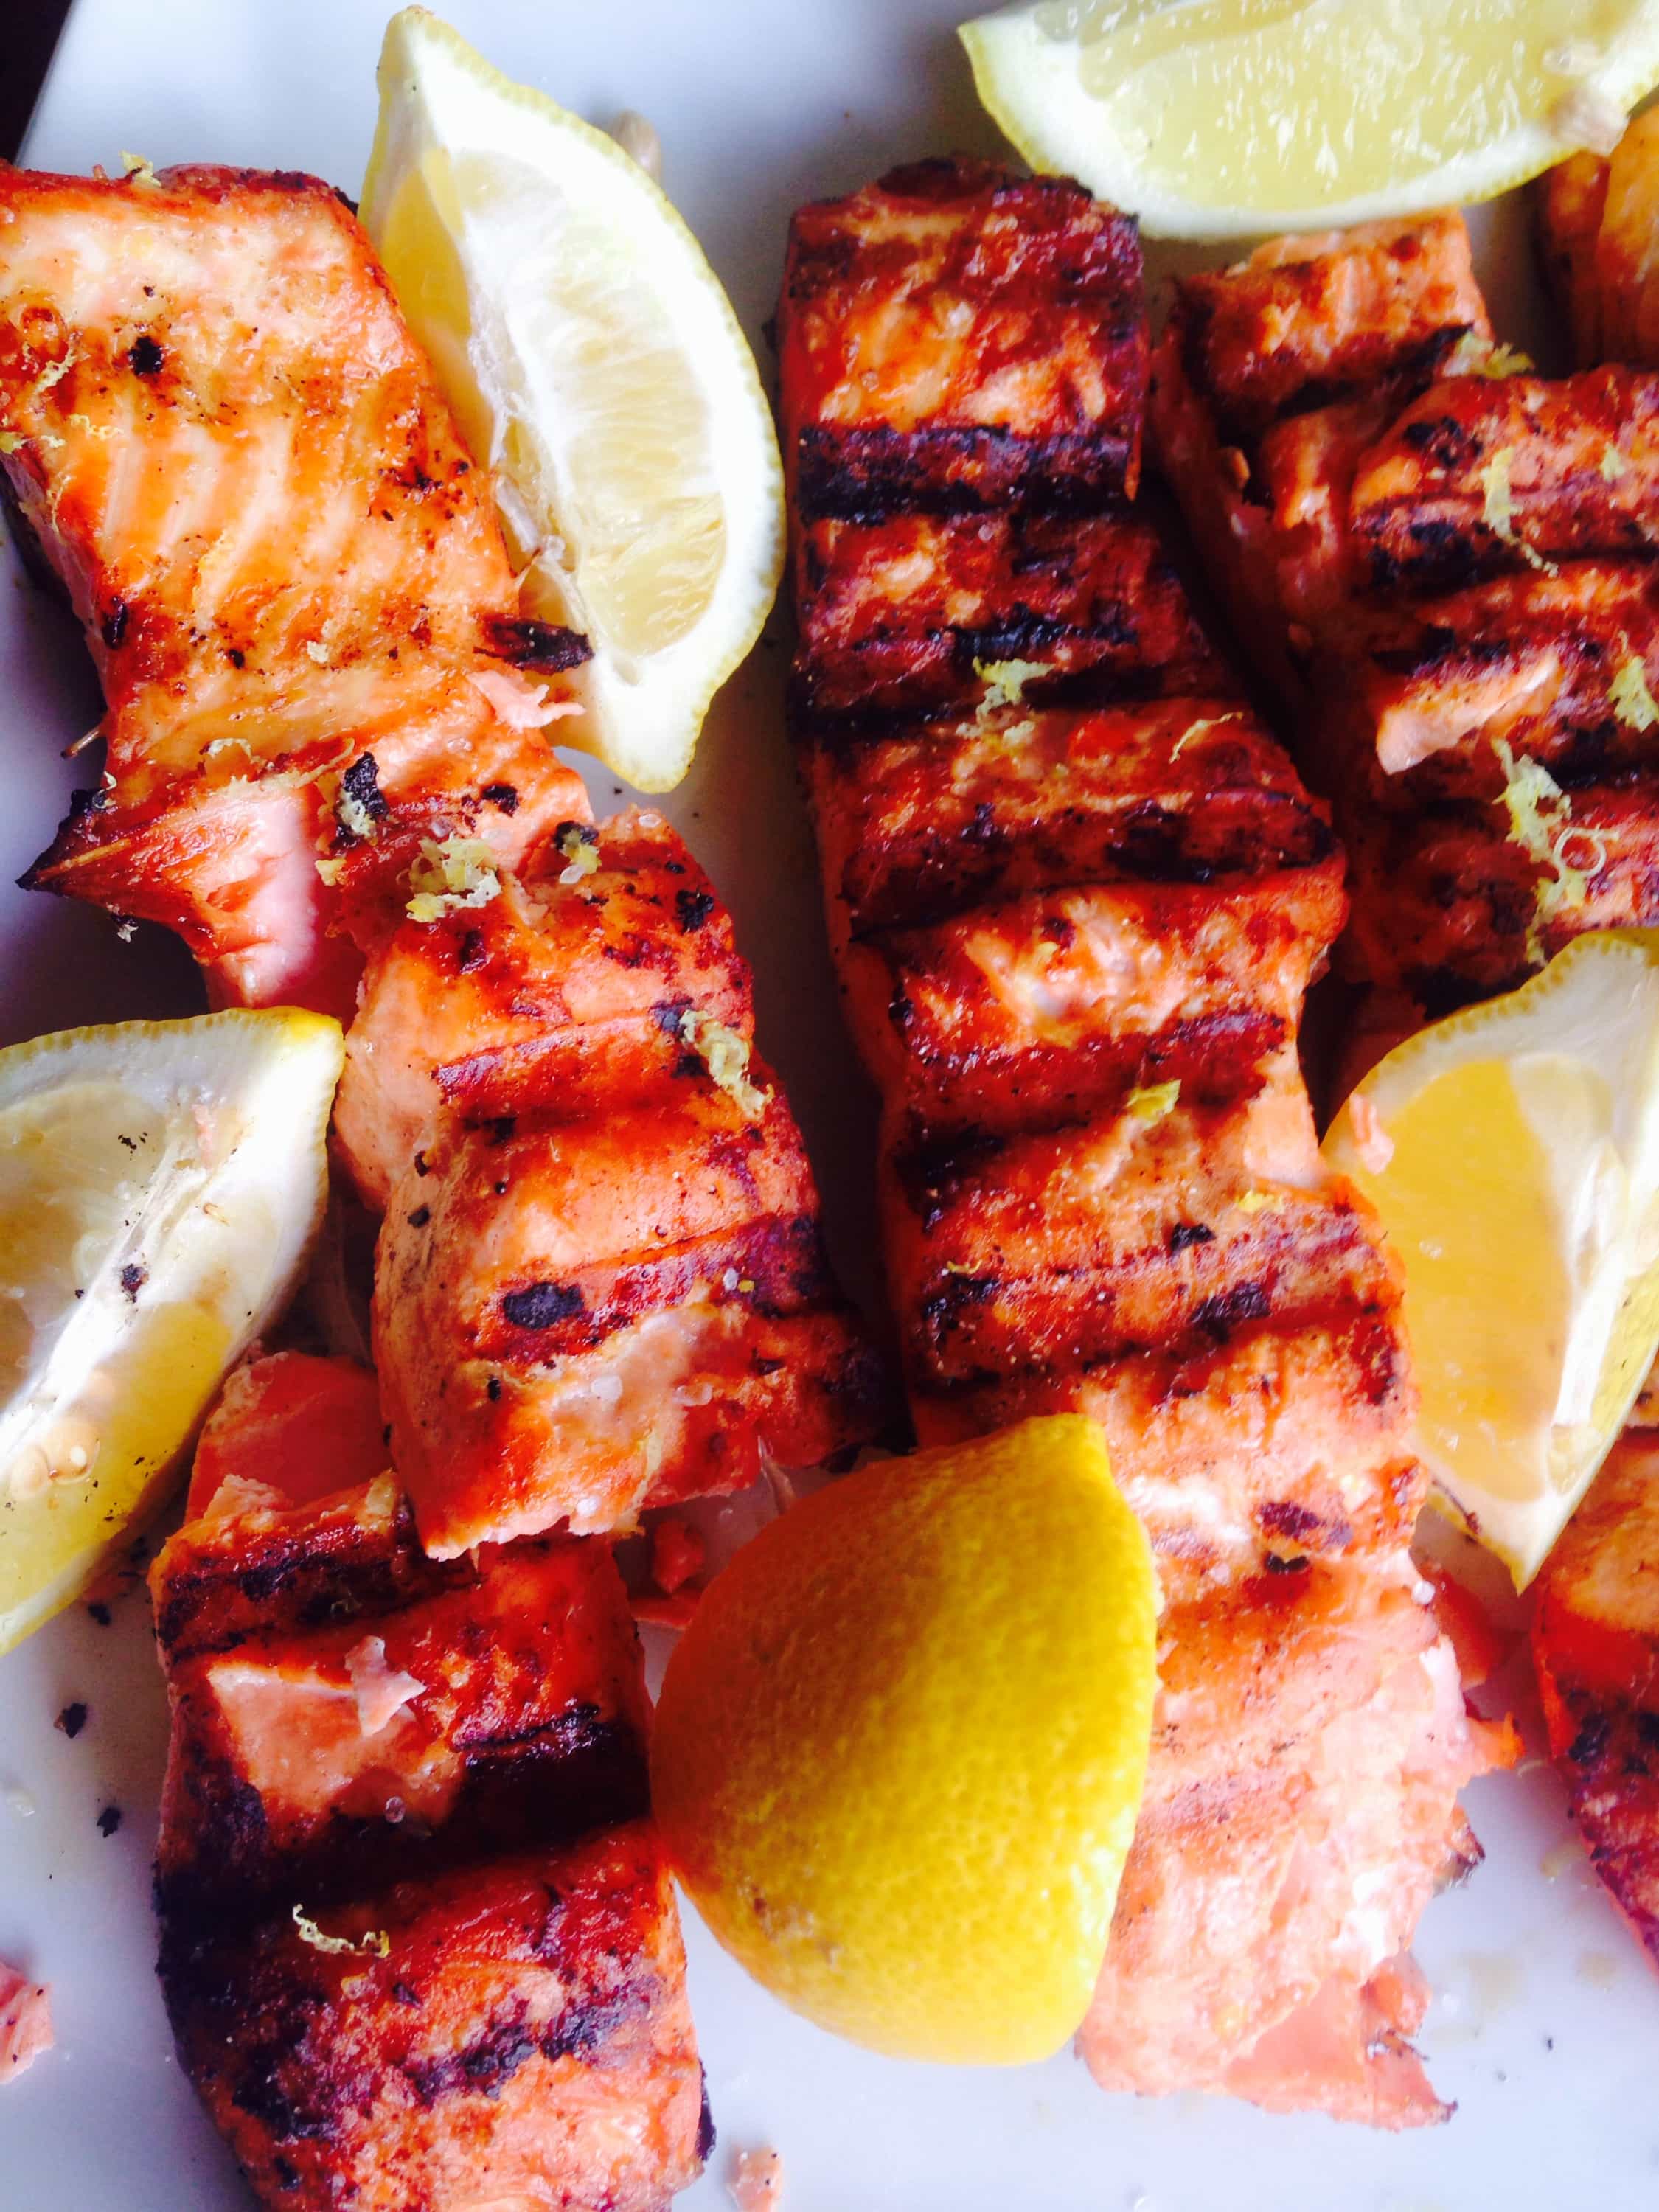 Lemon Grilled Salmon {21 Day Fix} - A healthy recipe from Confessions of a Fit Foodie